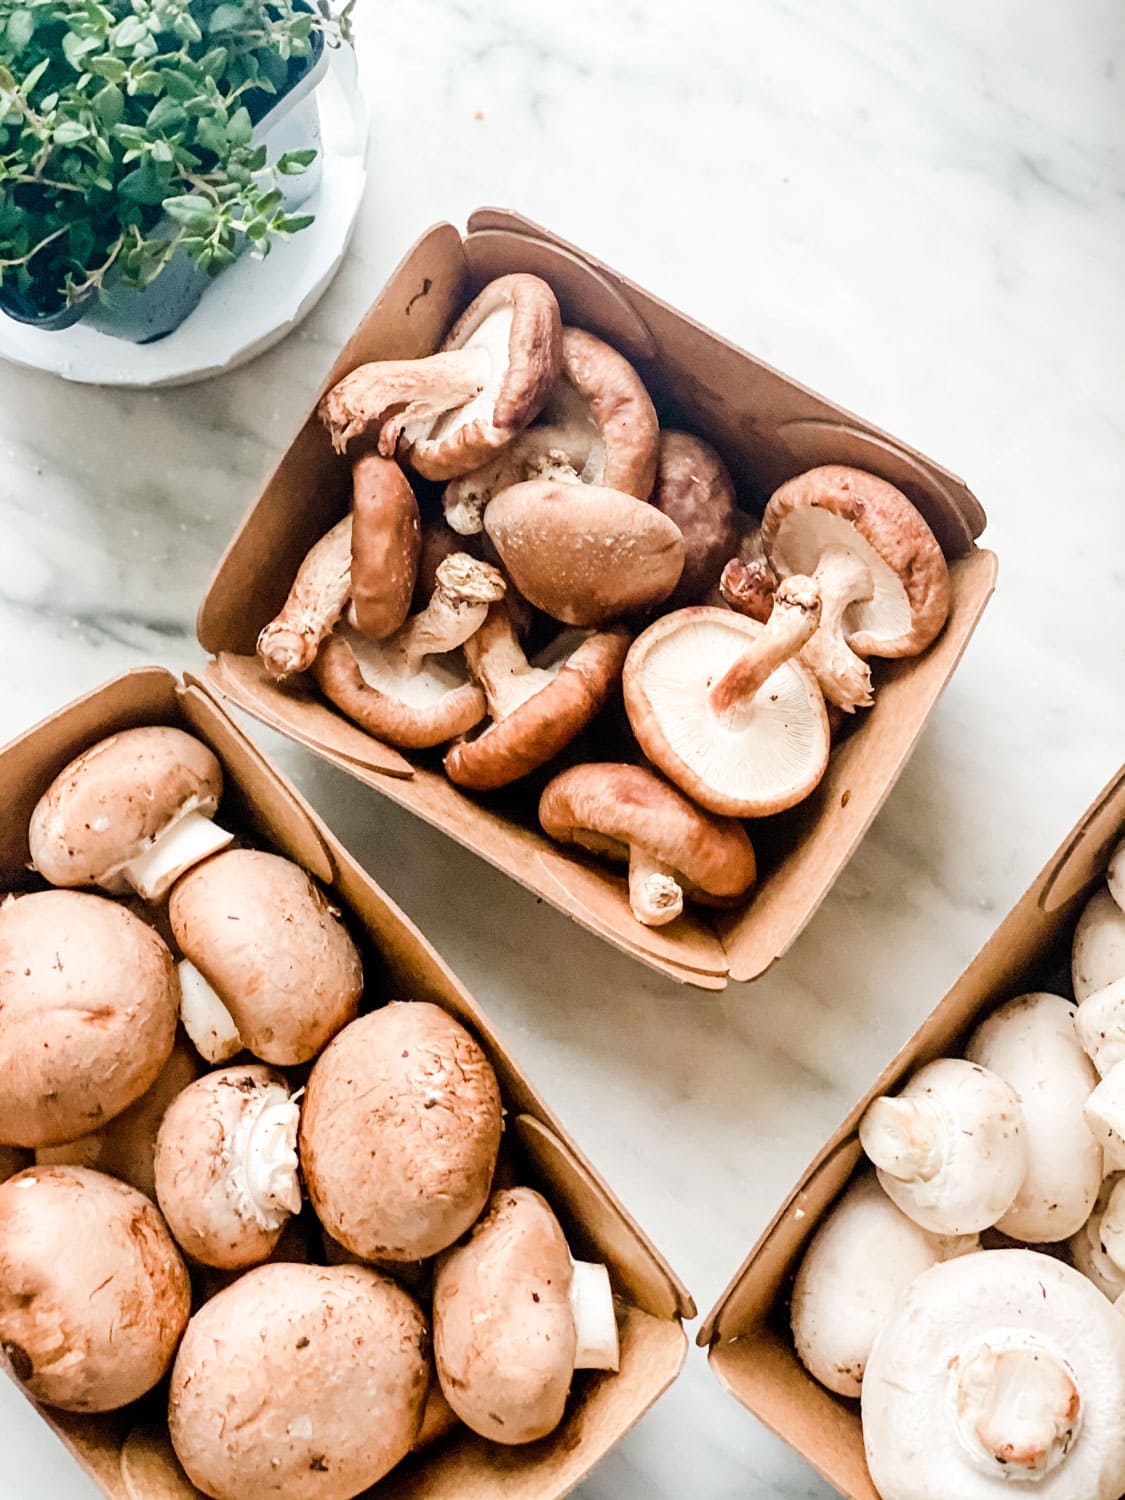 mushrooms in packages, thyme plant on marble countertop